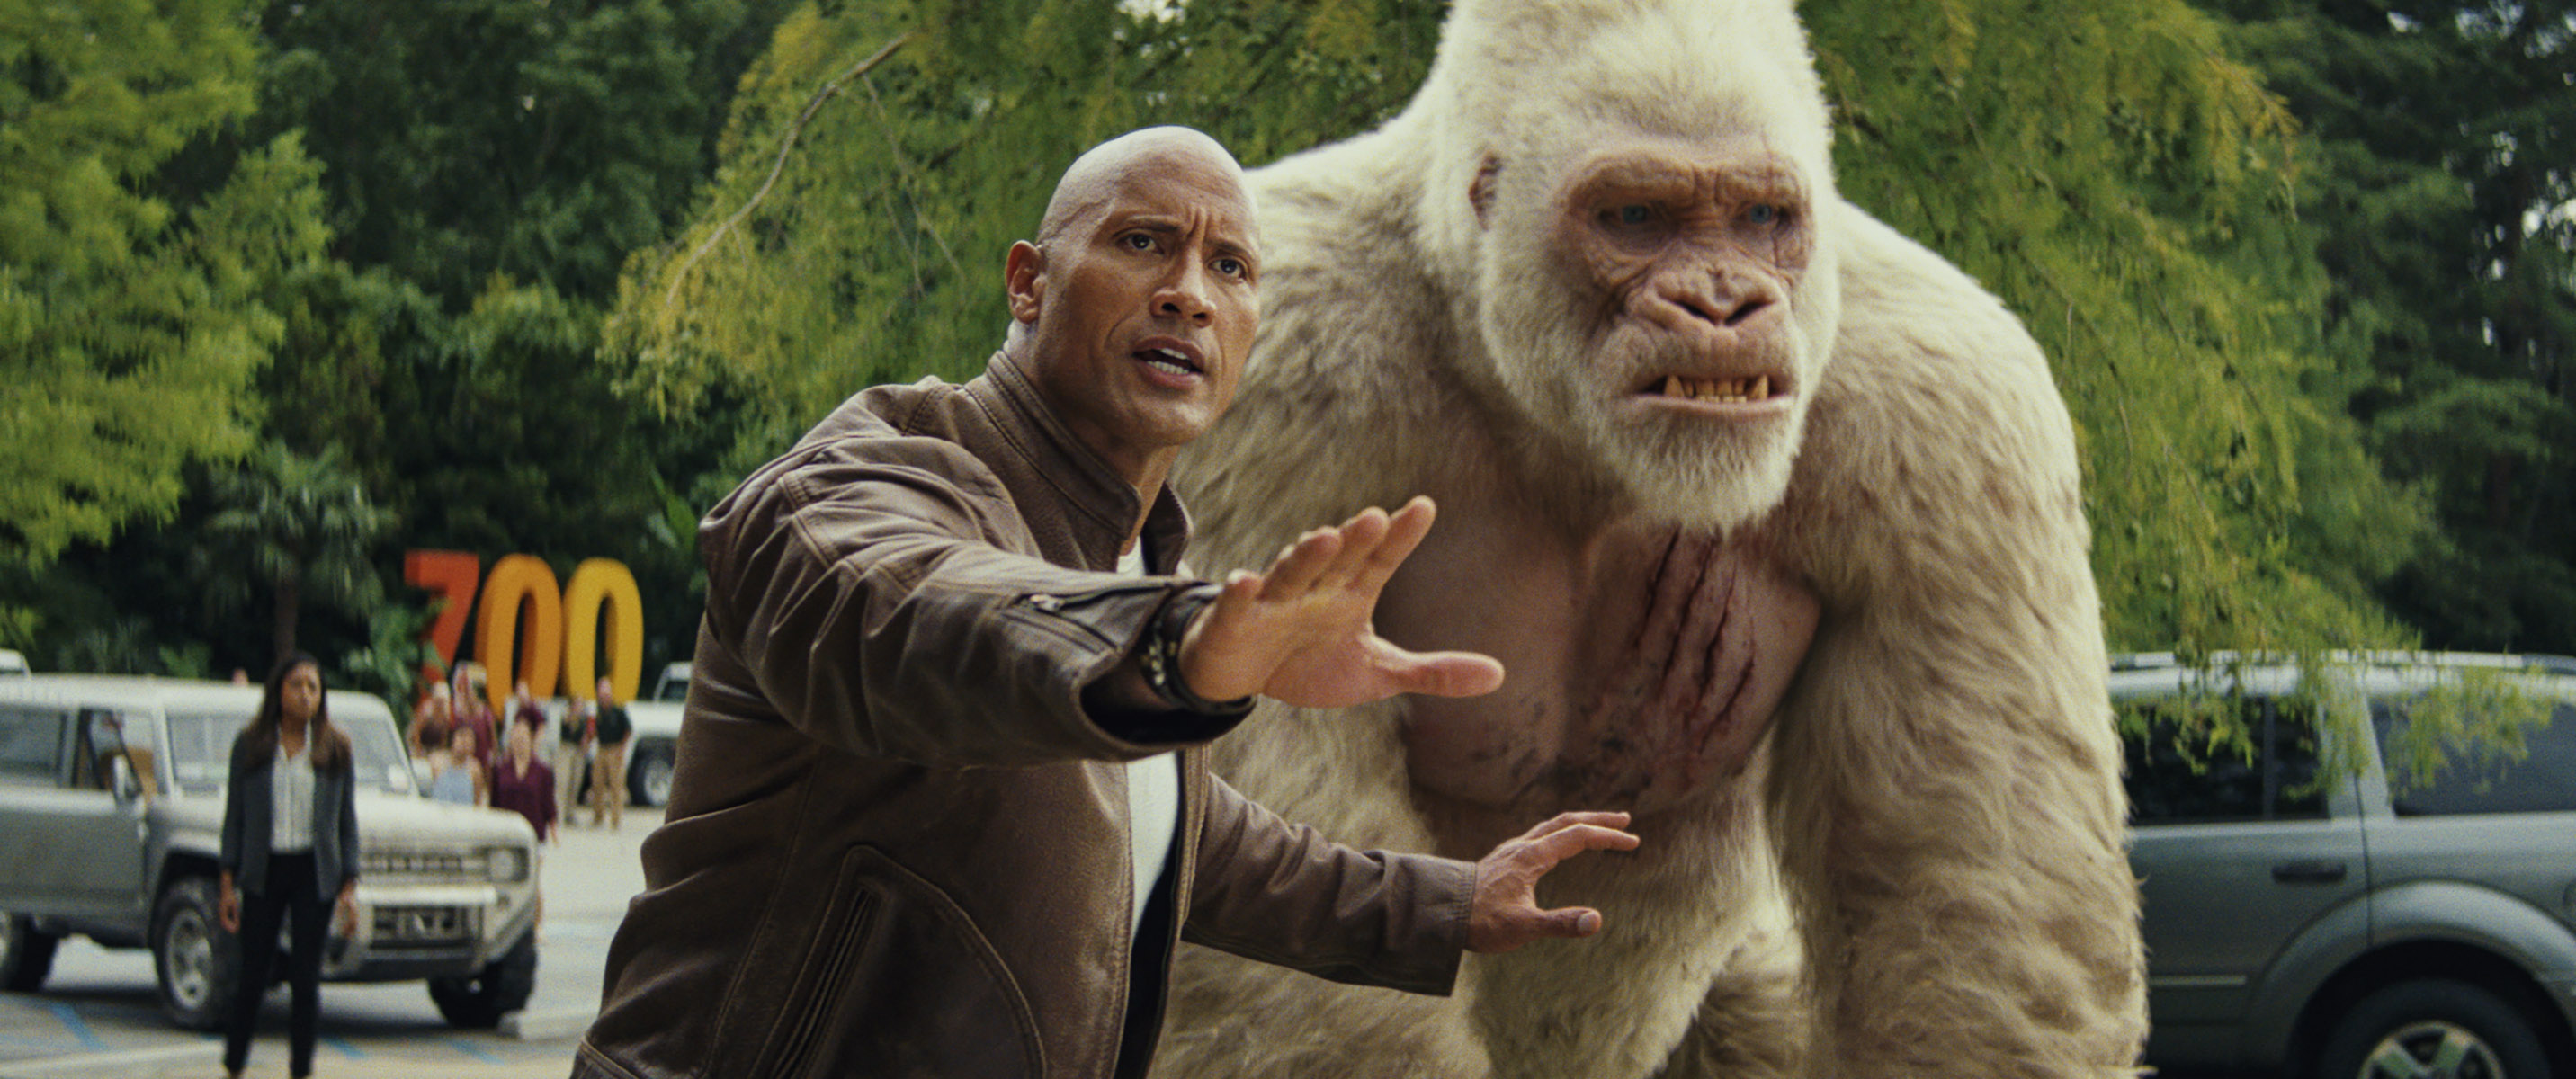 Dwayne Johnson with the giant ape George in RAMPAGE.